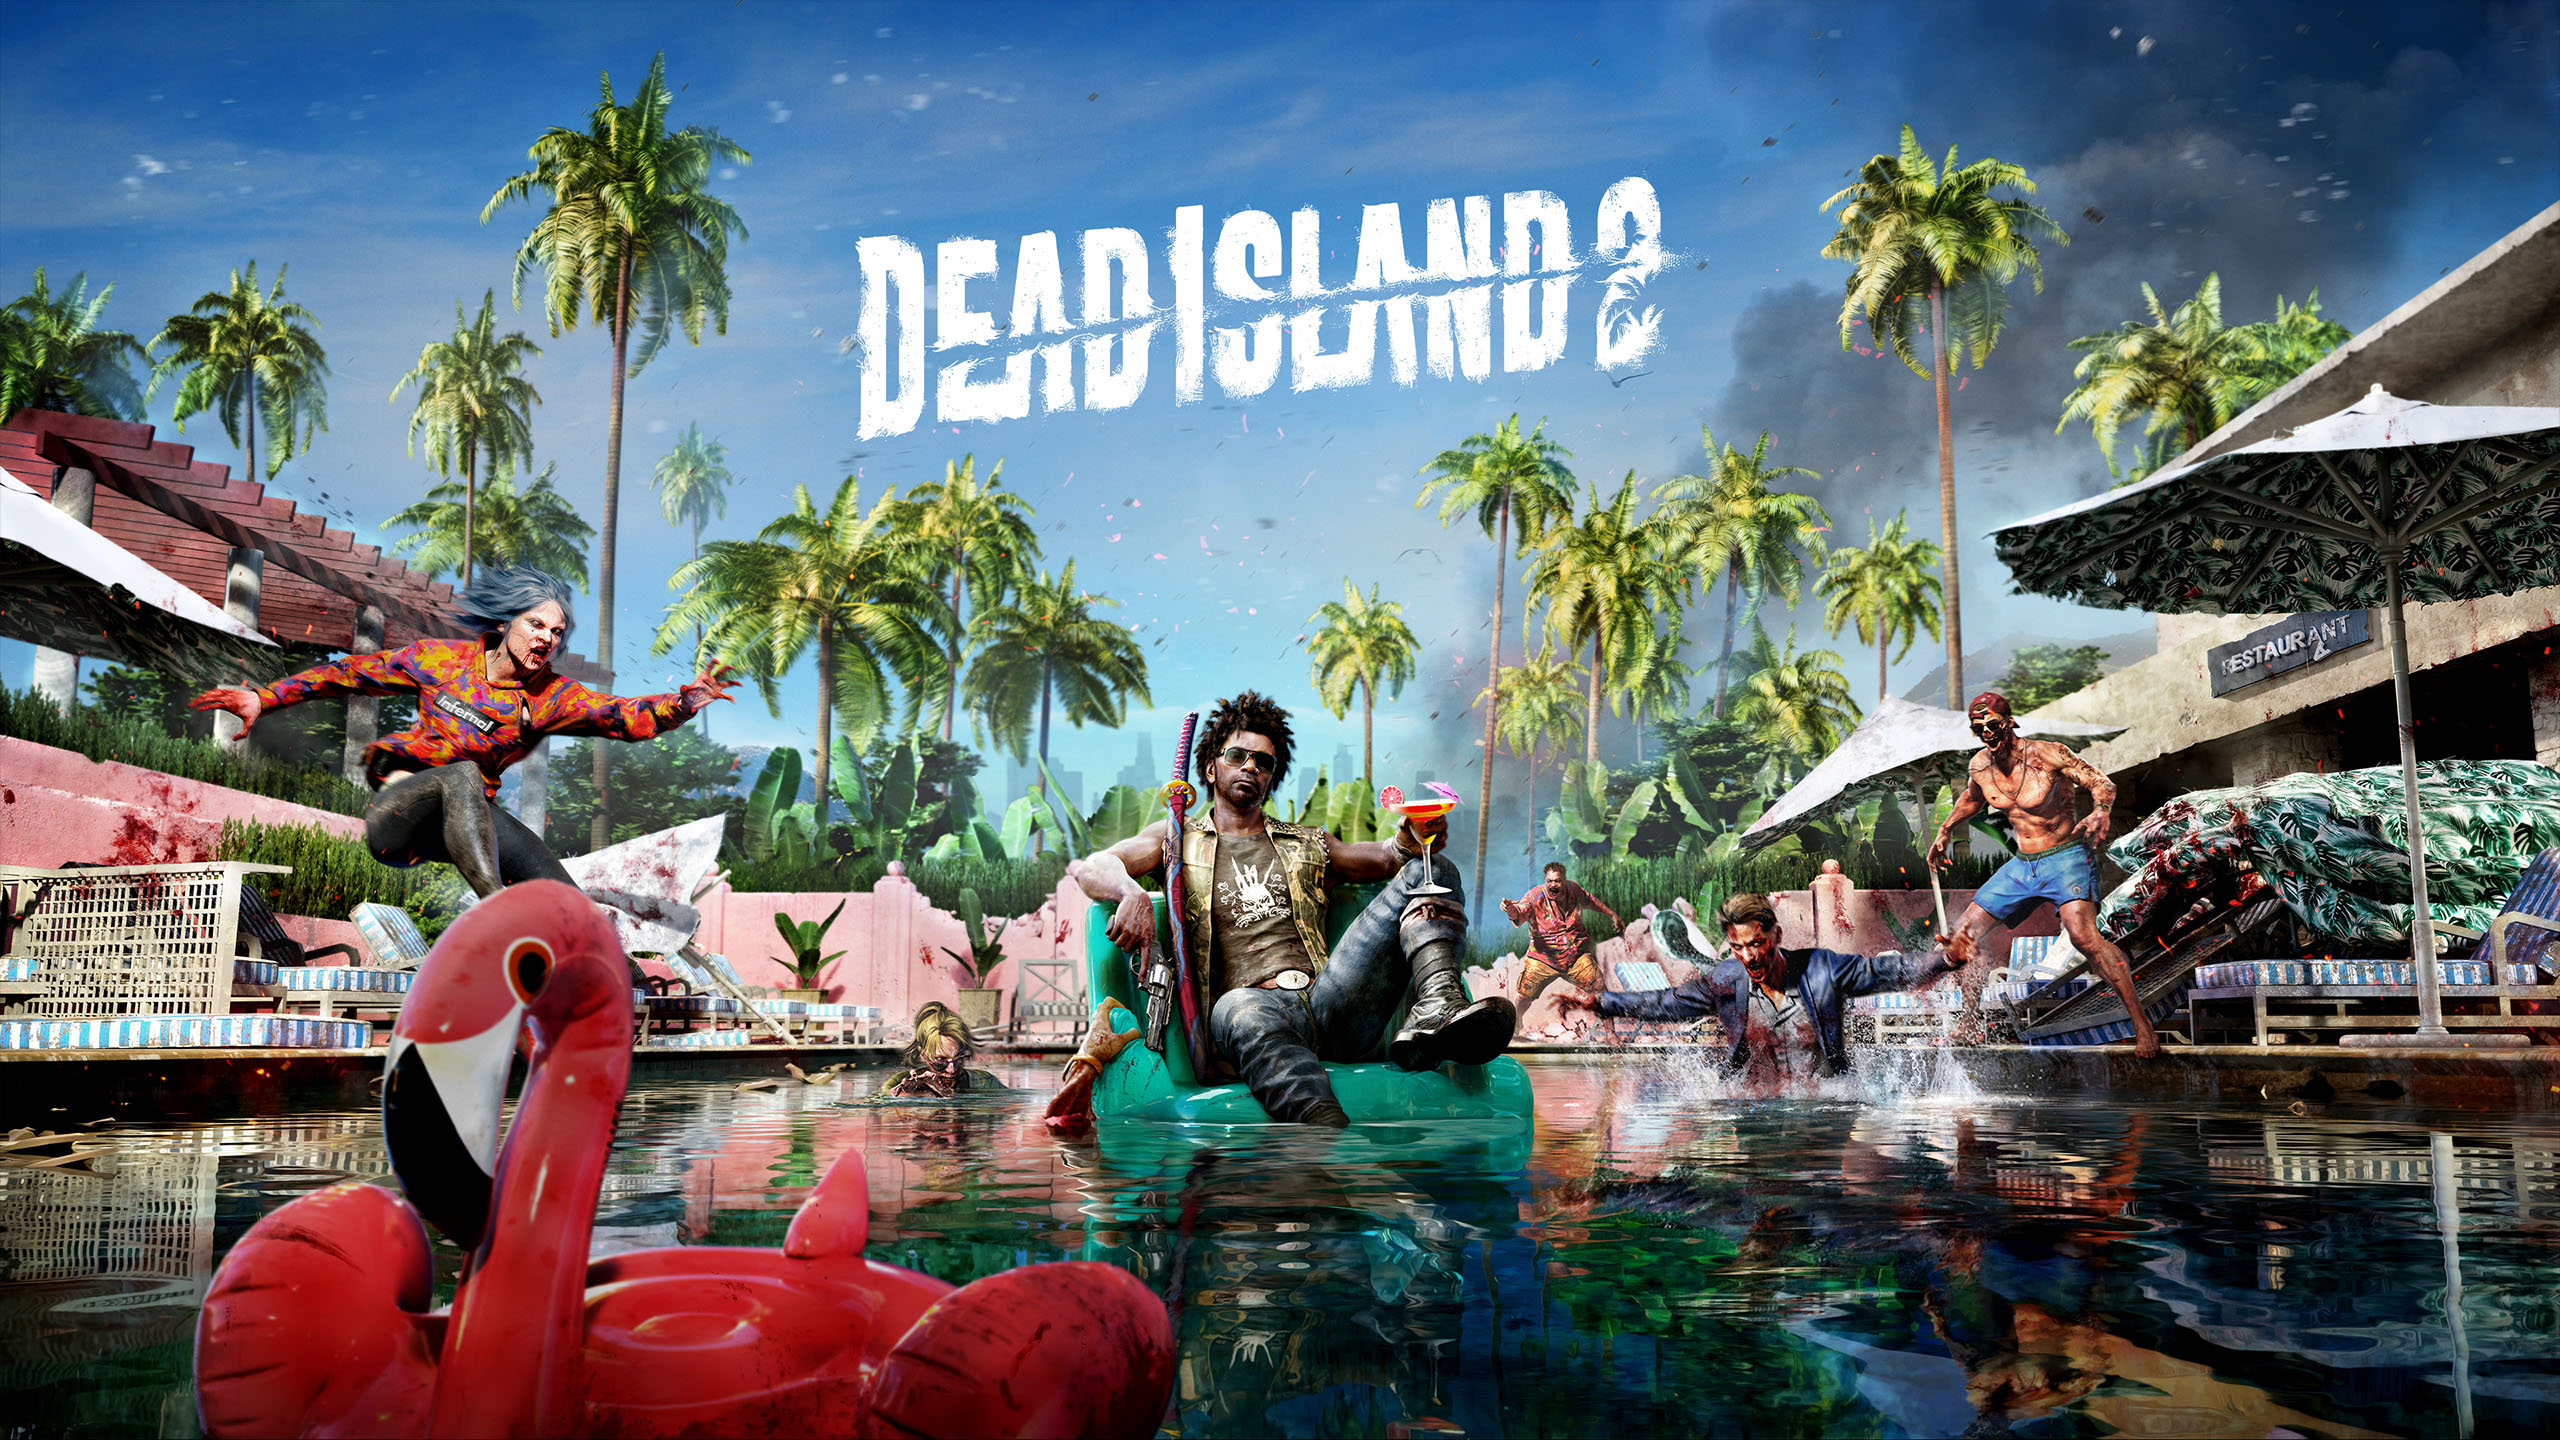 Dead Island 2: Survival Tips and Strategies for Taking on the Hordes of Zombies